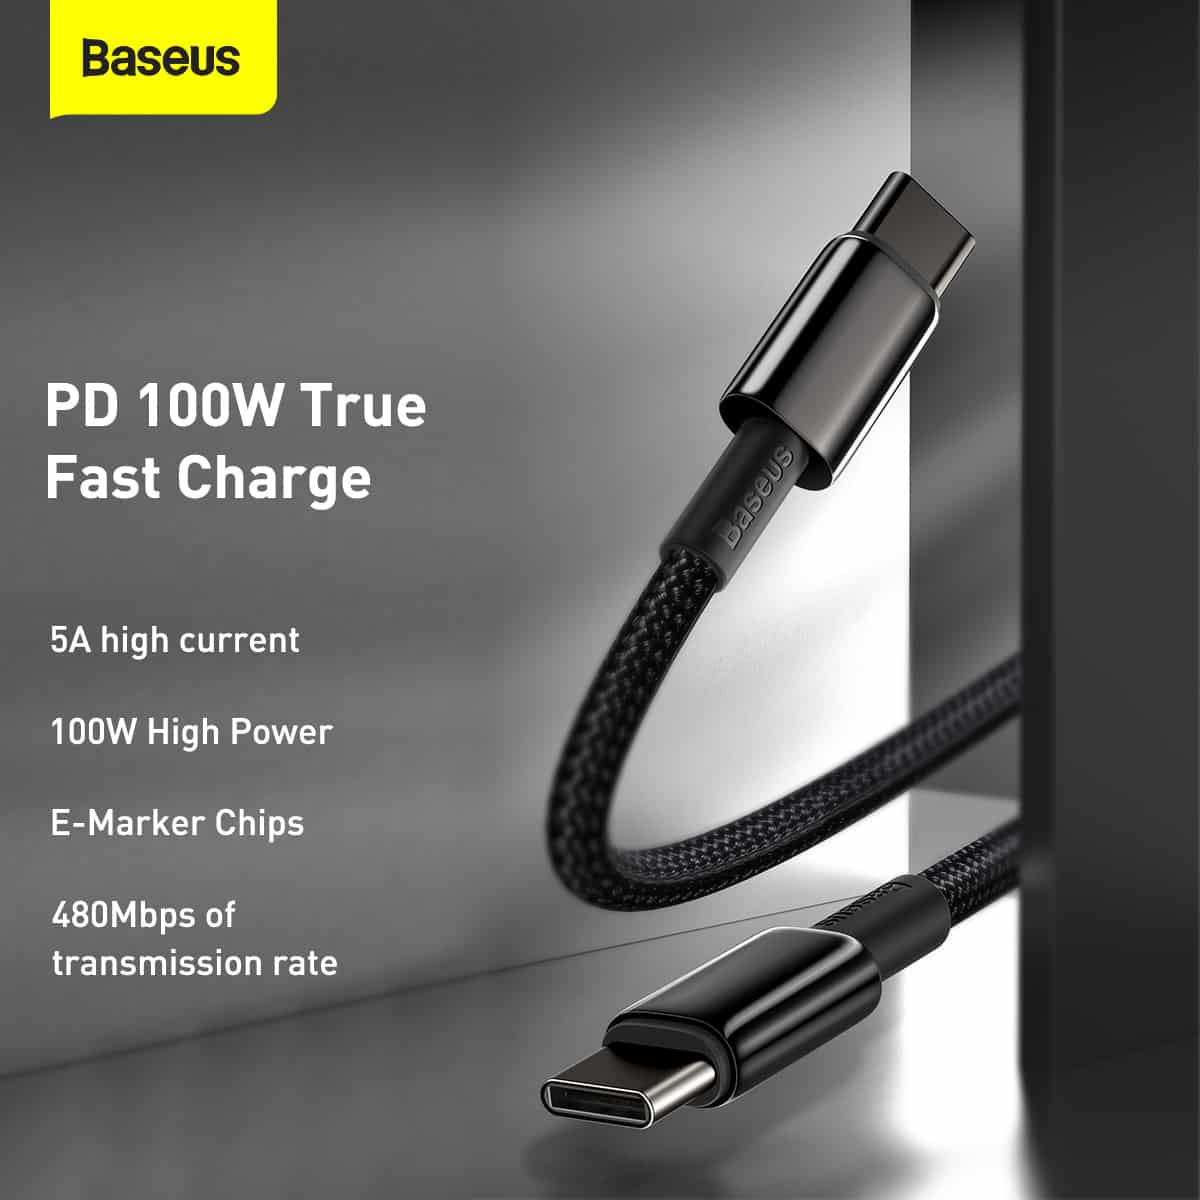 Baseus Tungsten Gold Fast Charging Data Cable Type-C to Type-C 100W